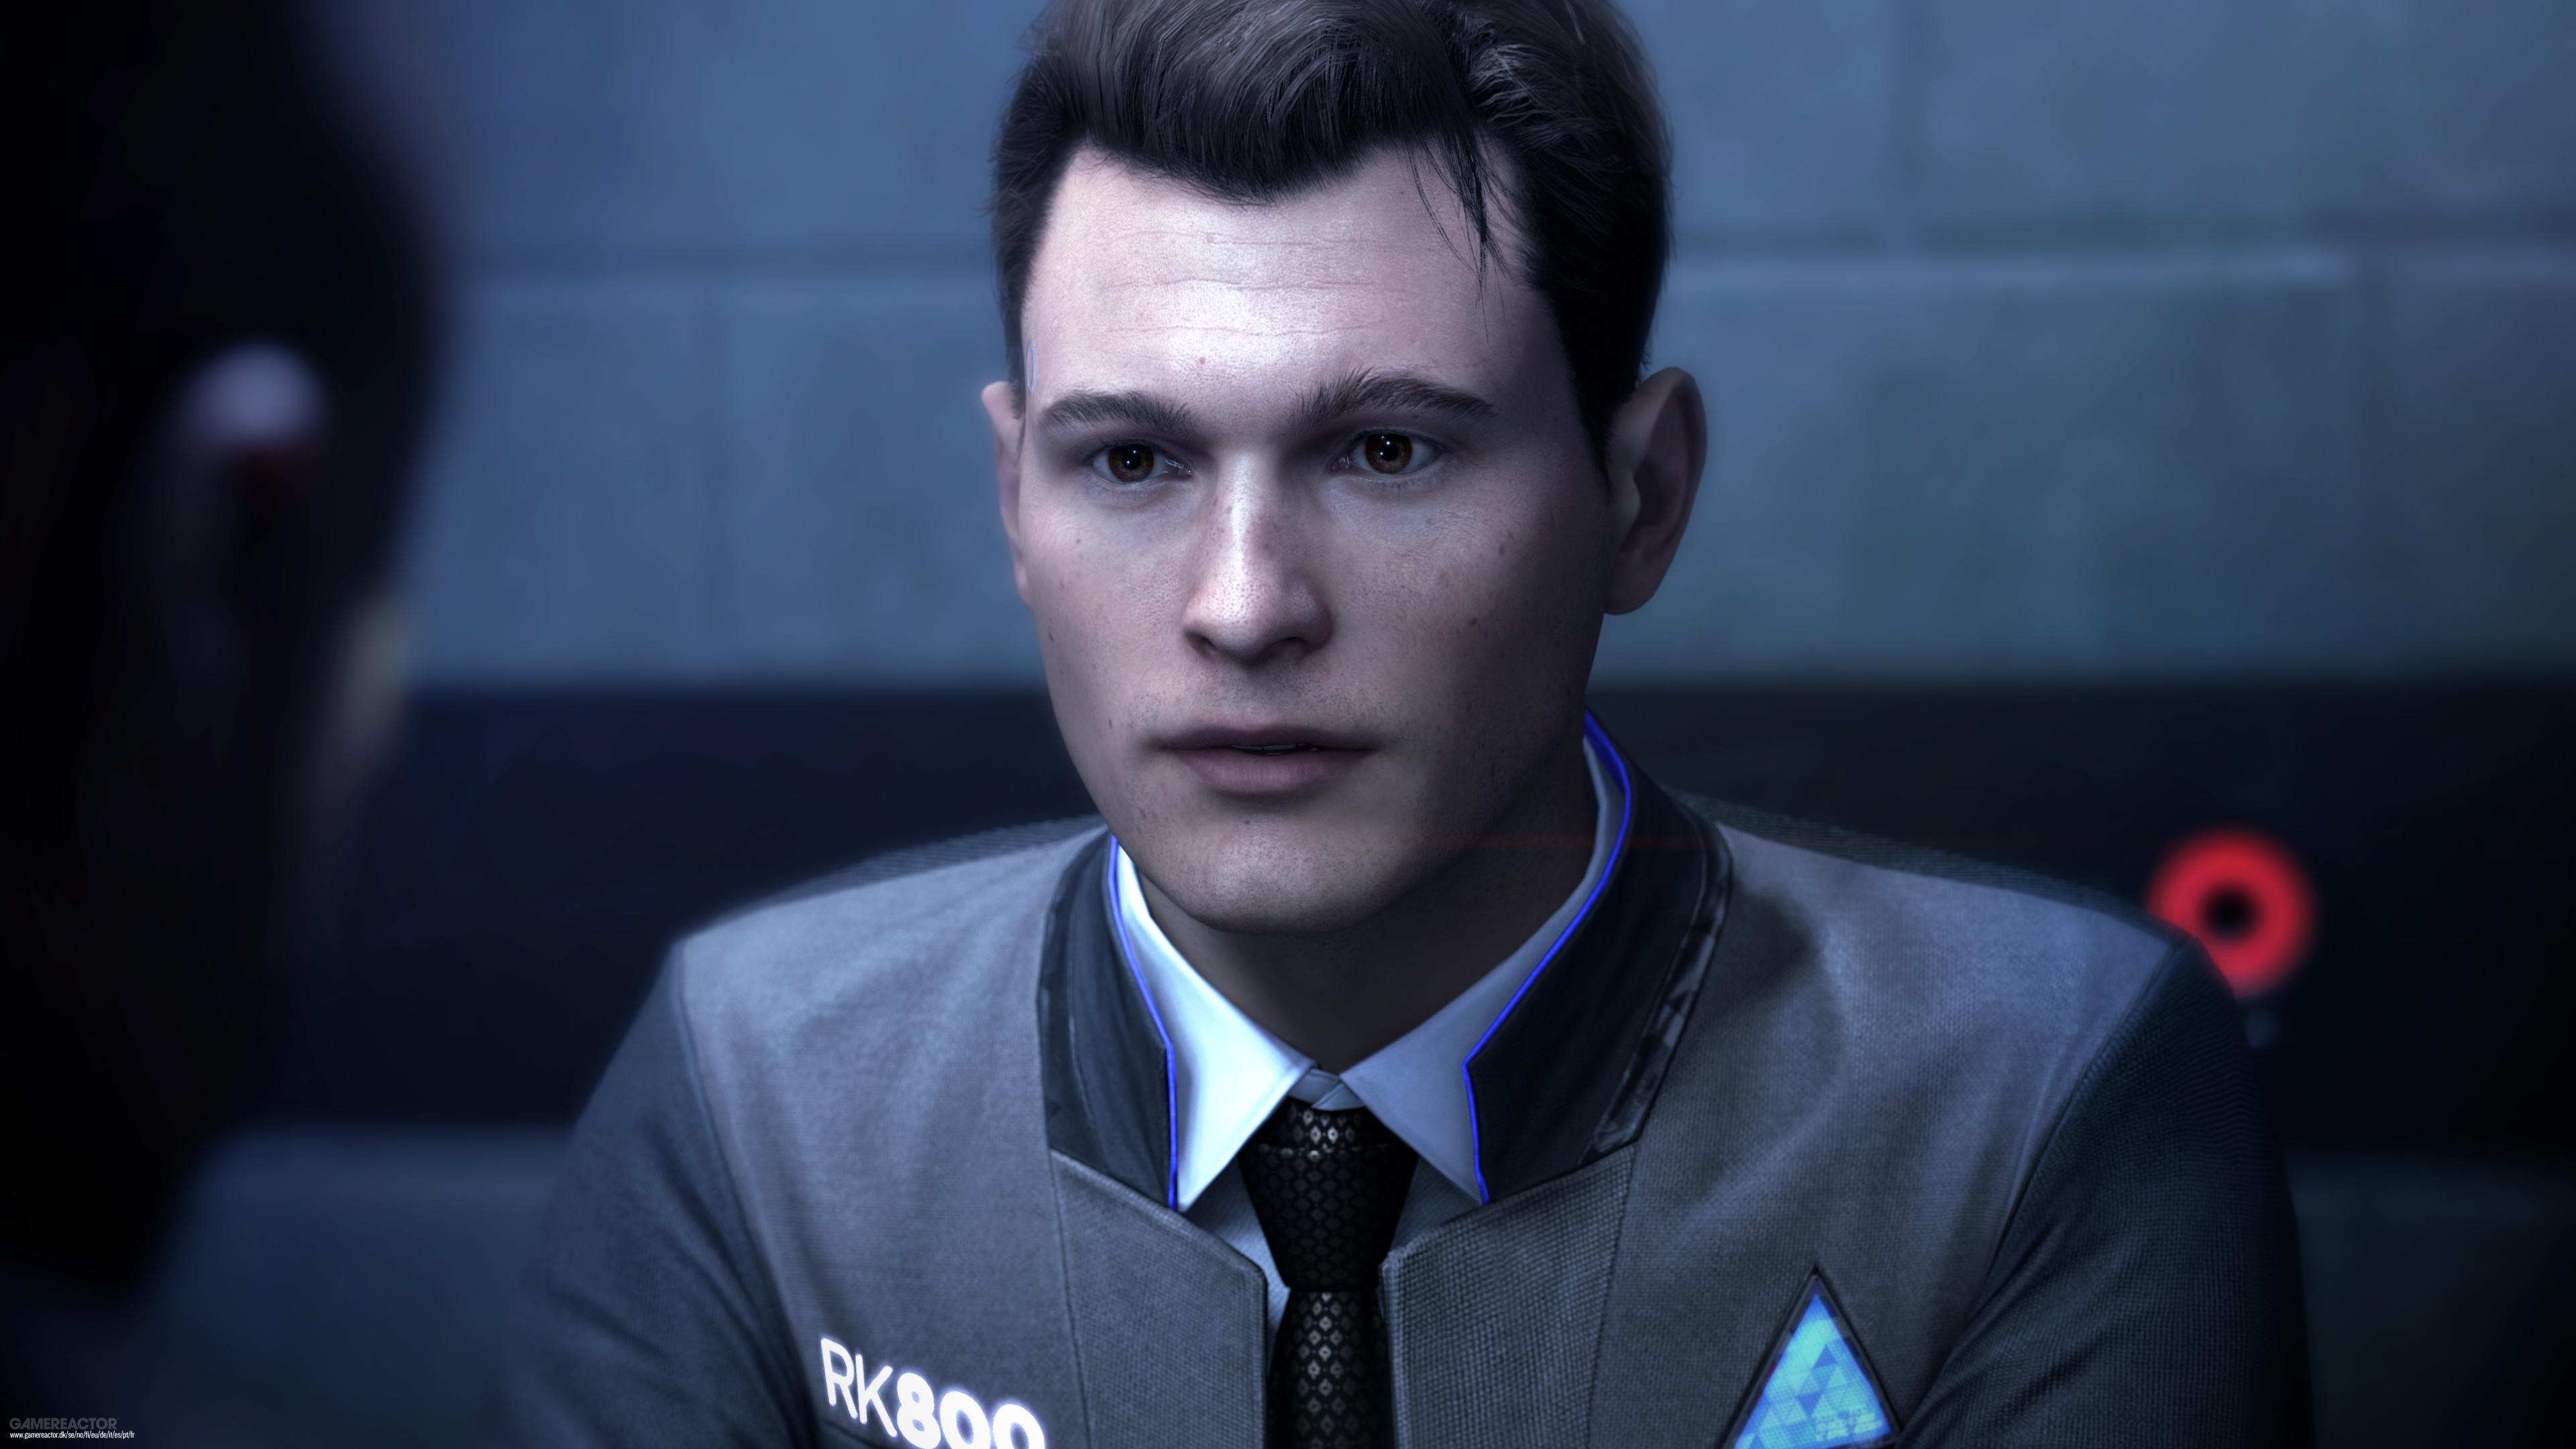 How Old Is Connor Detroit Become Human Connor-Schauspieler spielt Detroit: Become Human als Connor